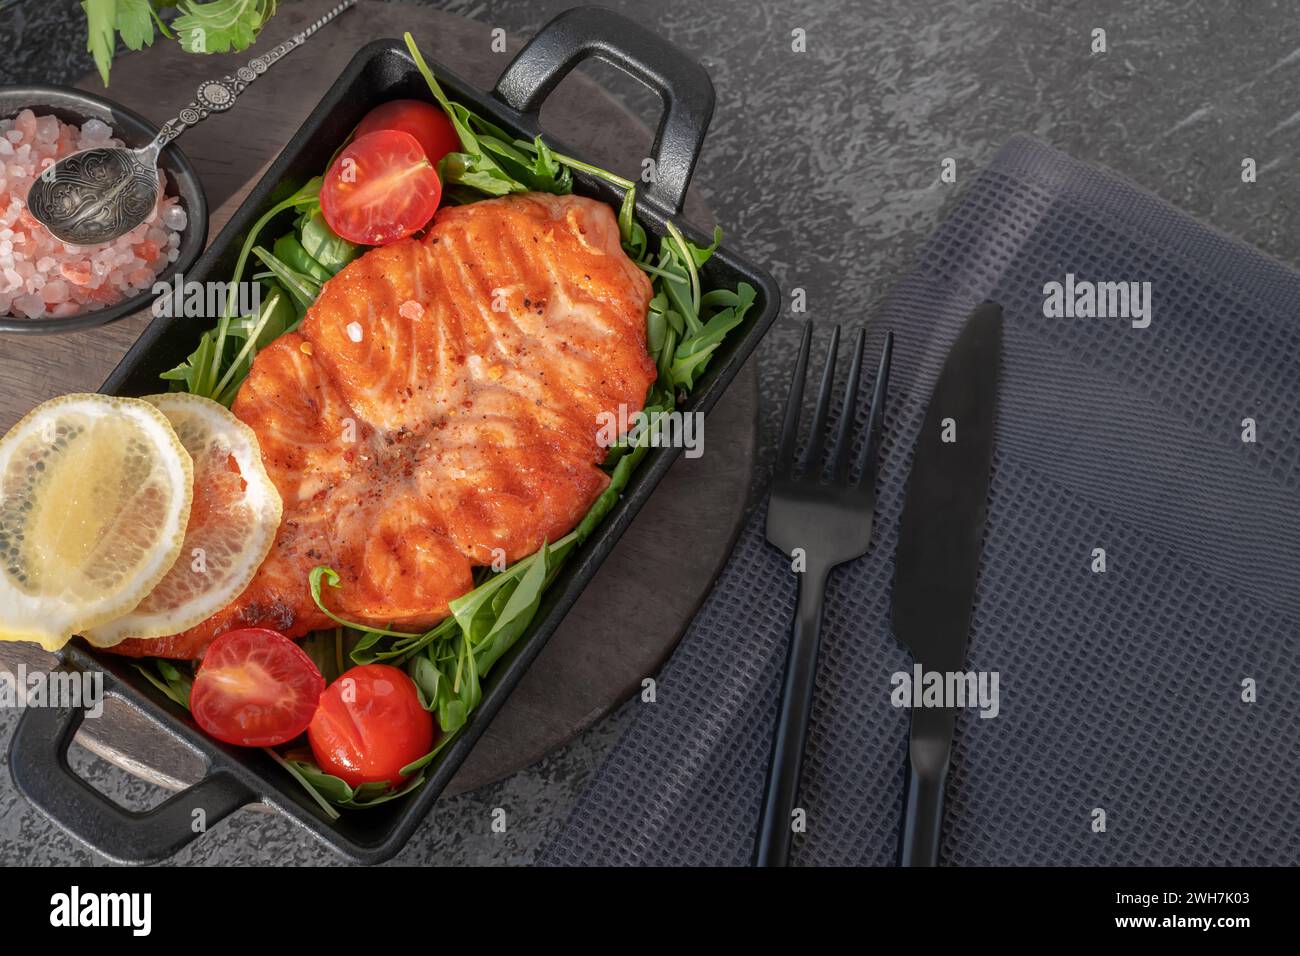 Grilled salmon steak with arugula salad, tomatoes and shallots. The concept of healthy eating, diet, low calorie. Stock Photo